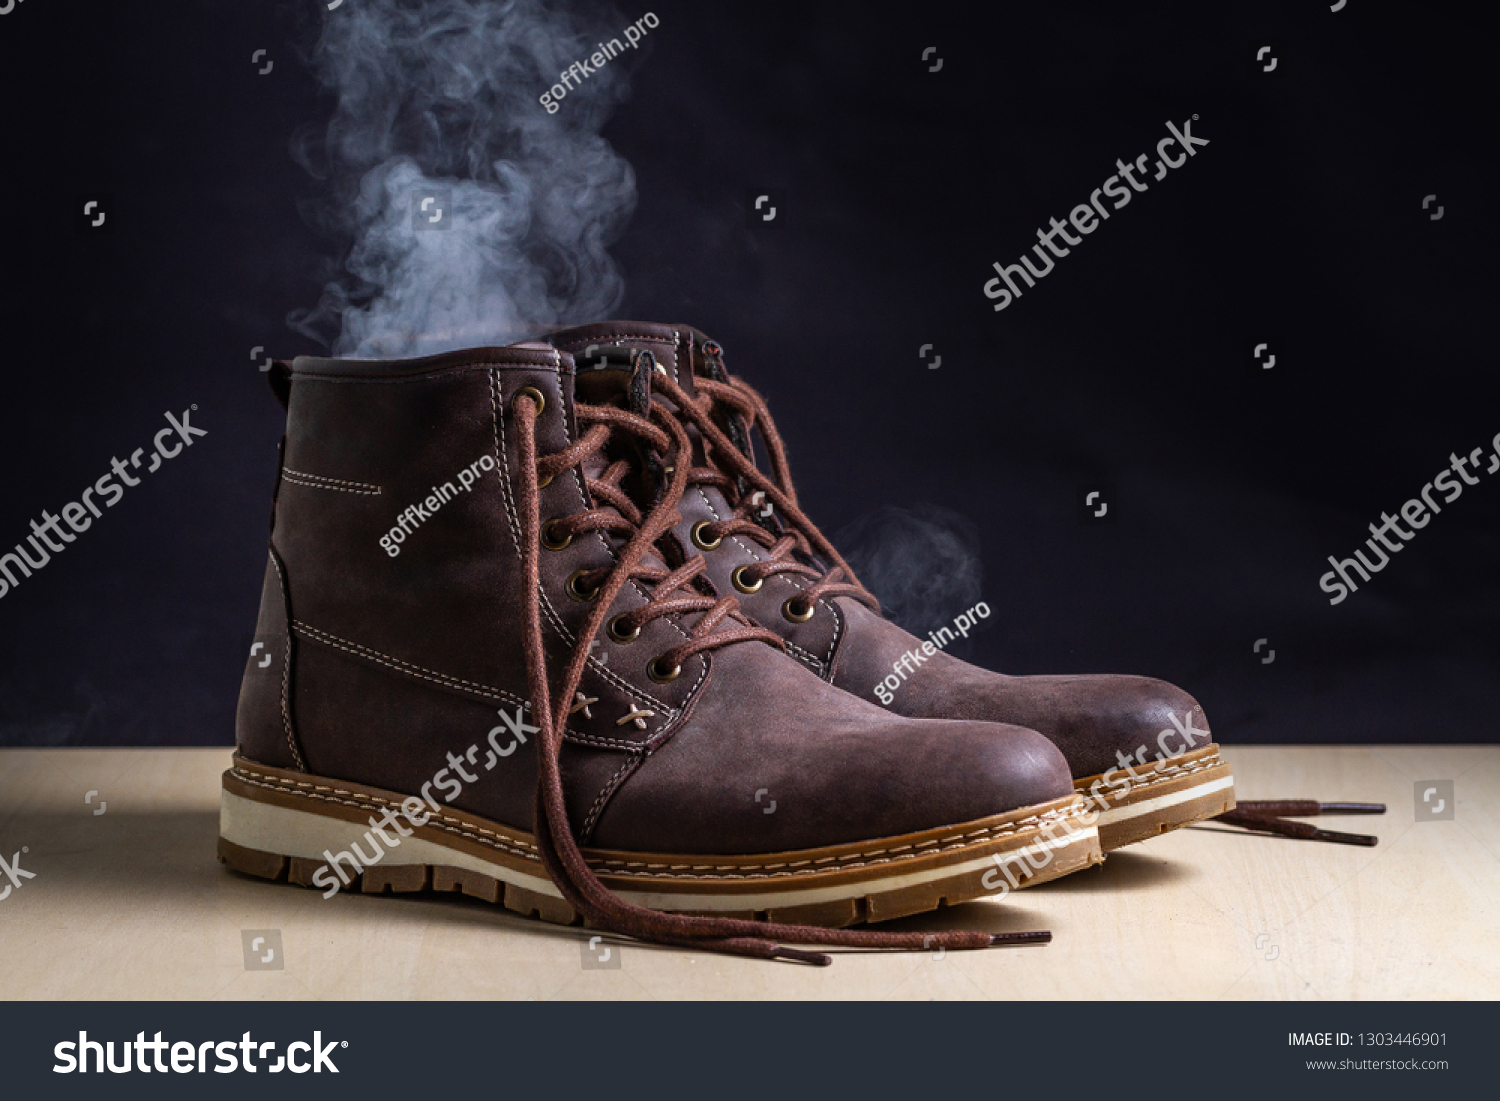 work boots smell